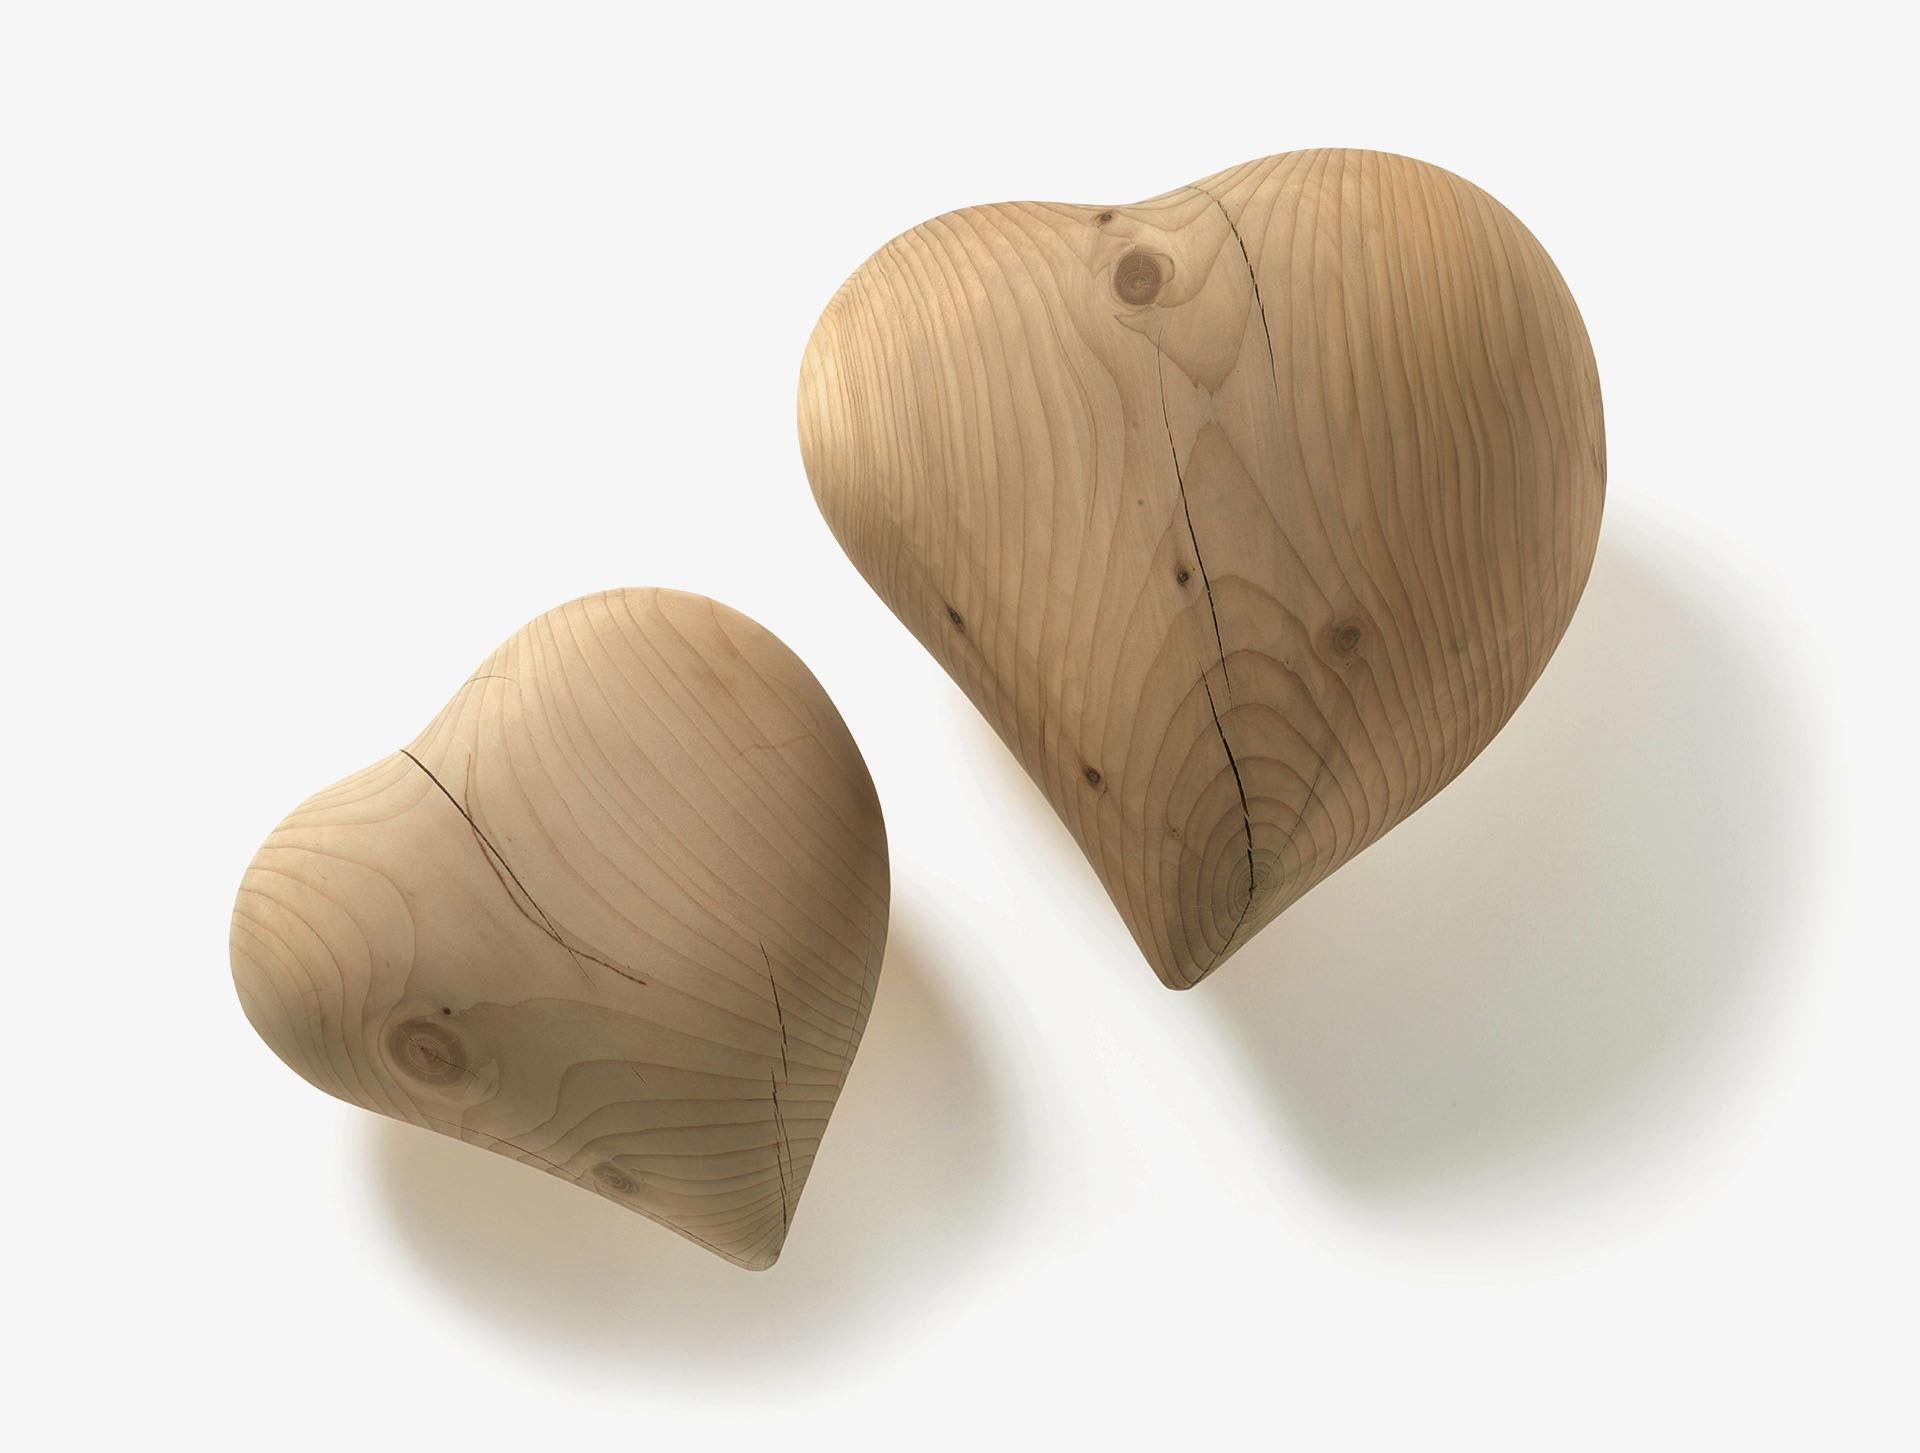 Cuore Heart Cedar Wood Paperweight Small
Dimensions: 11 x 11 x 5cm
In stock in Los Angeles

Riva 1920 produced the love symbol in scented cedarwood. To be used as paperweight or simply as a design object, it is available in three different